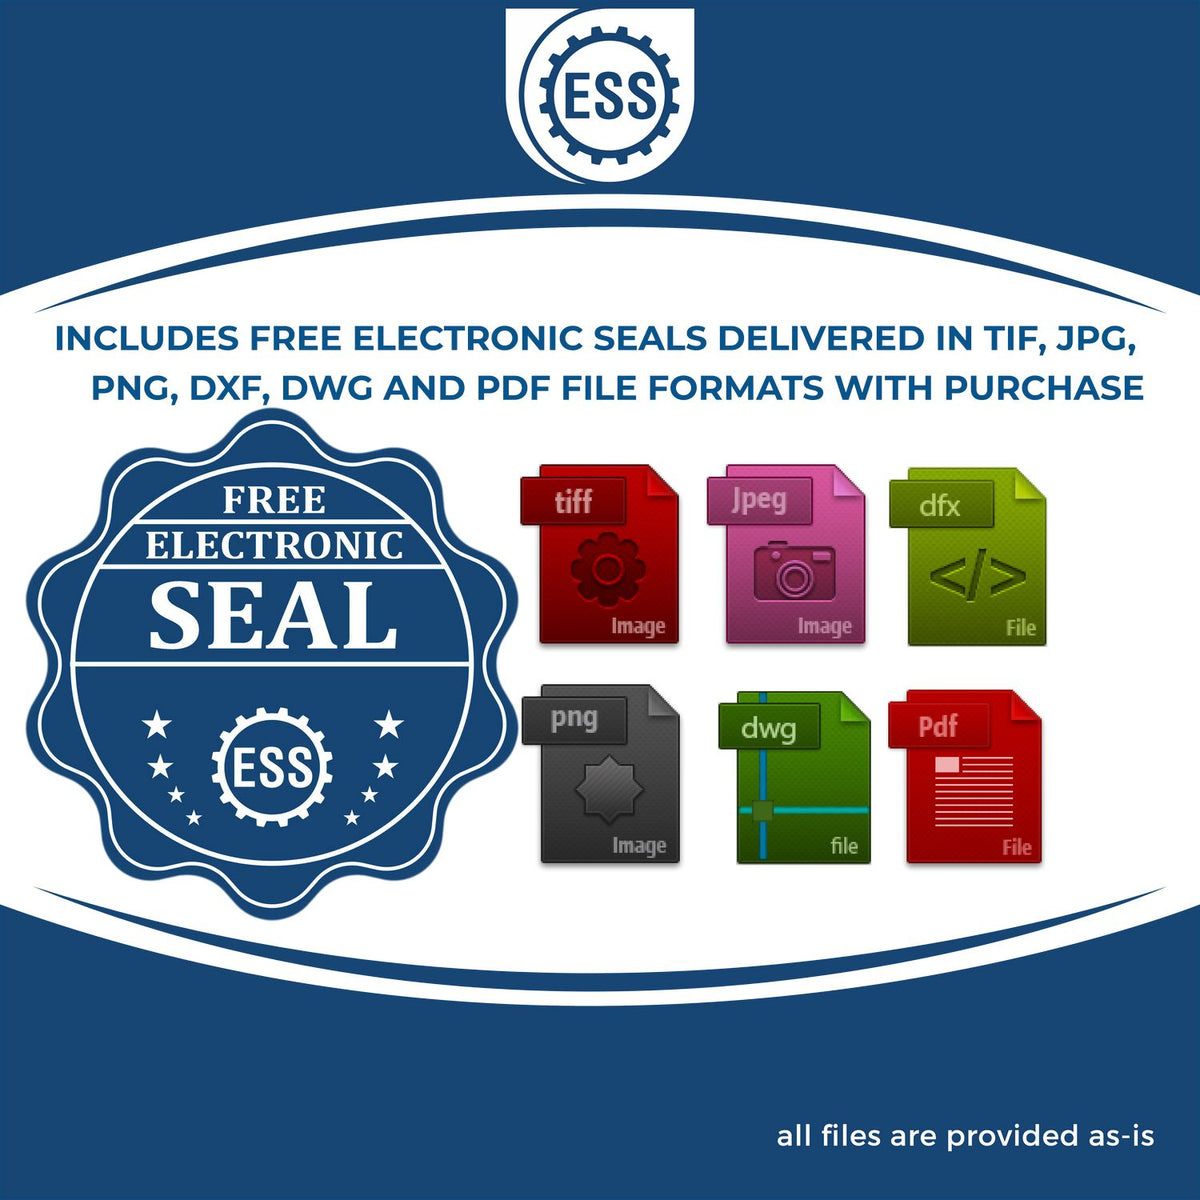 An infographic for the free electronic seal for the Hybrid New Hampshire Geologist Seal illustrating the different file type icons such as DXF, DWG, TIF, JPG and PNG.